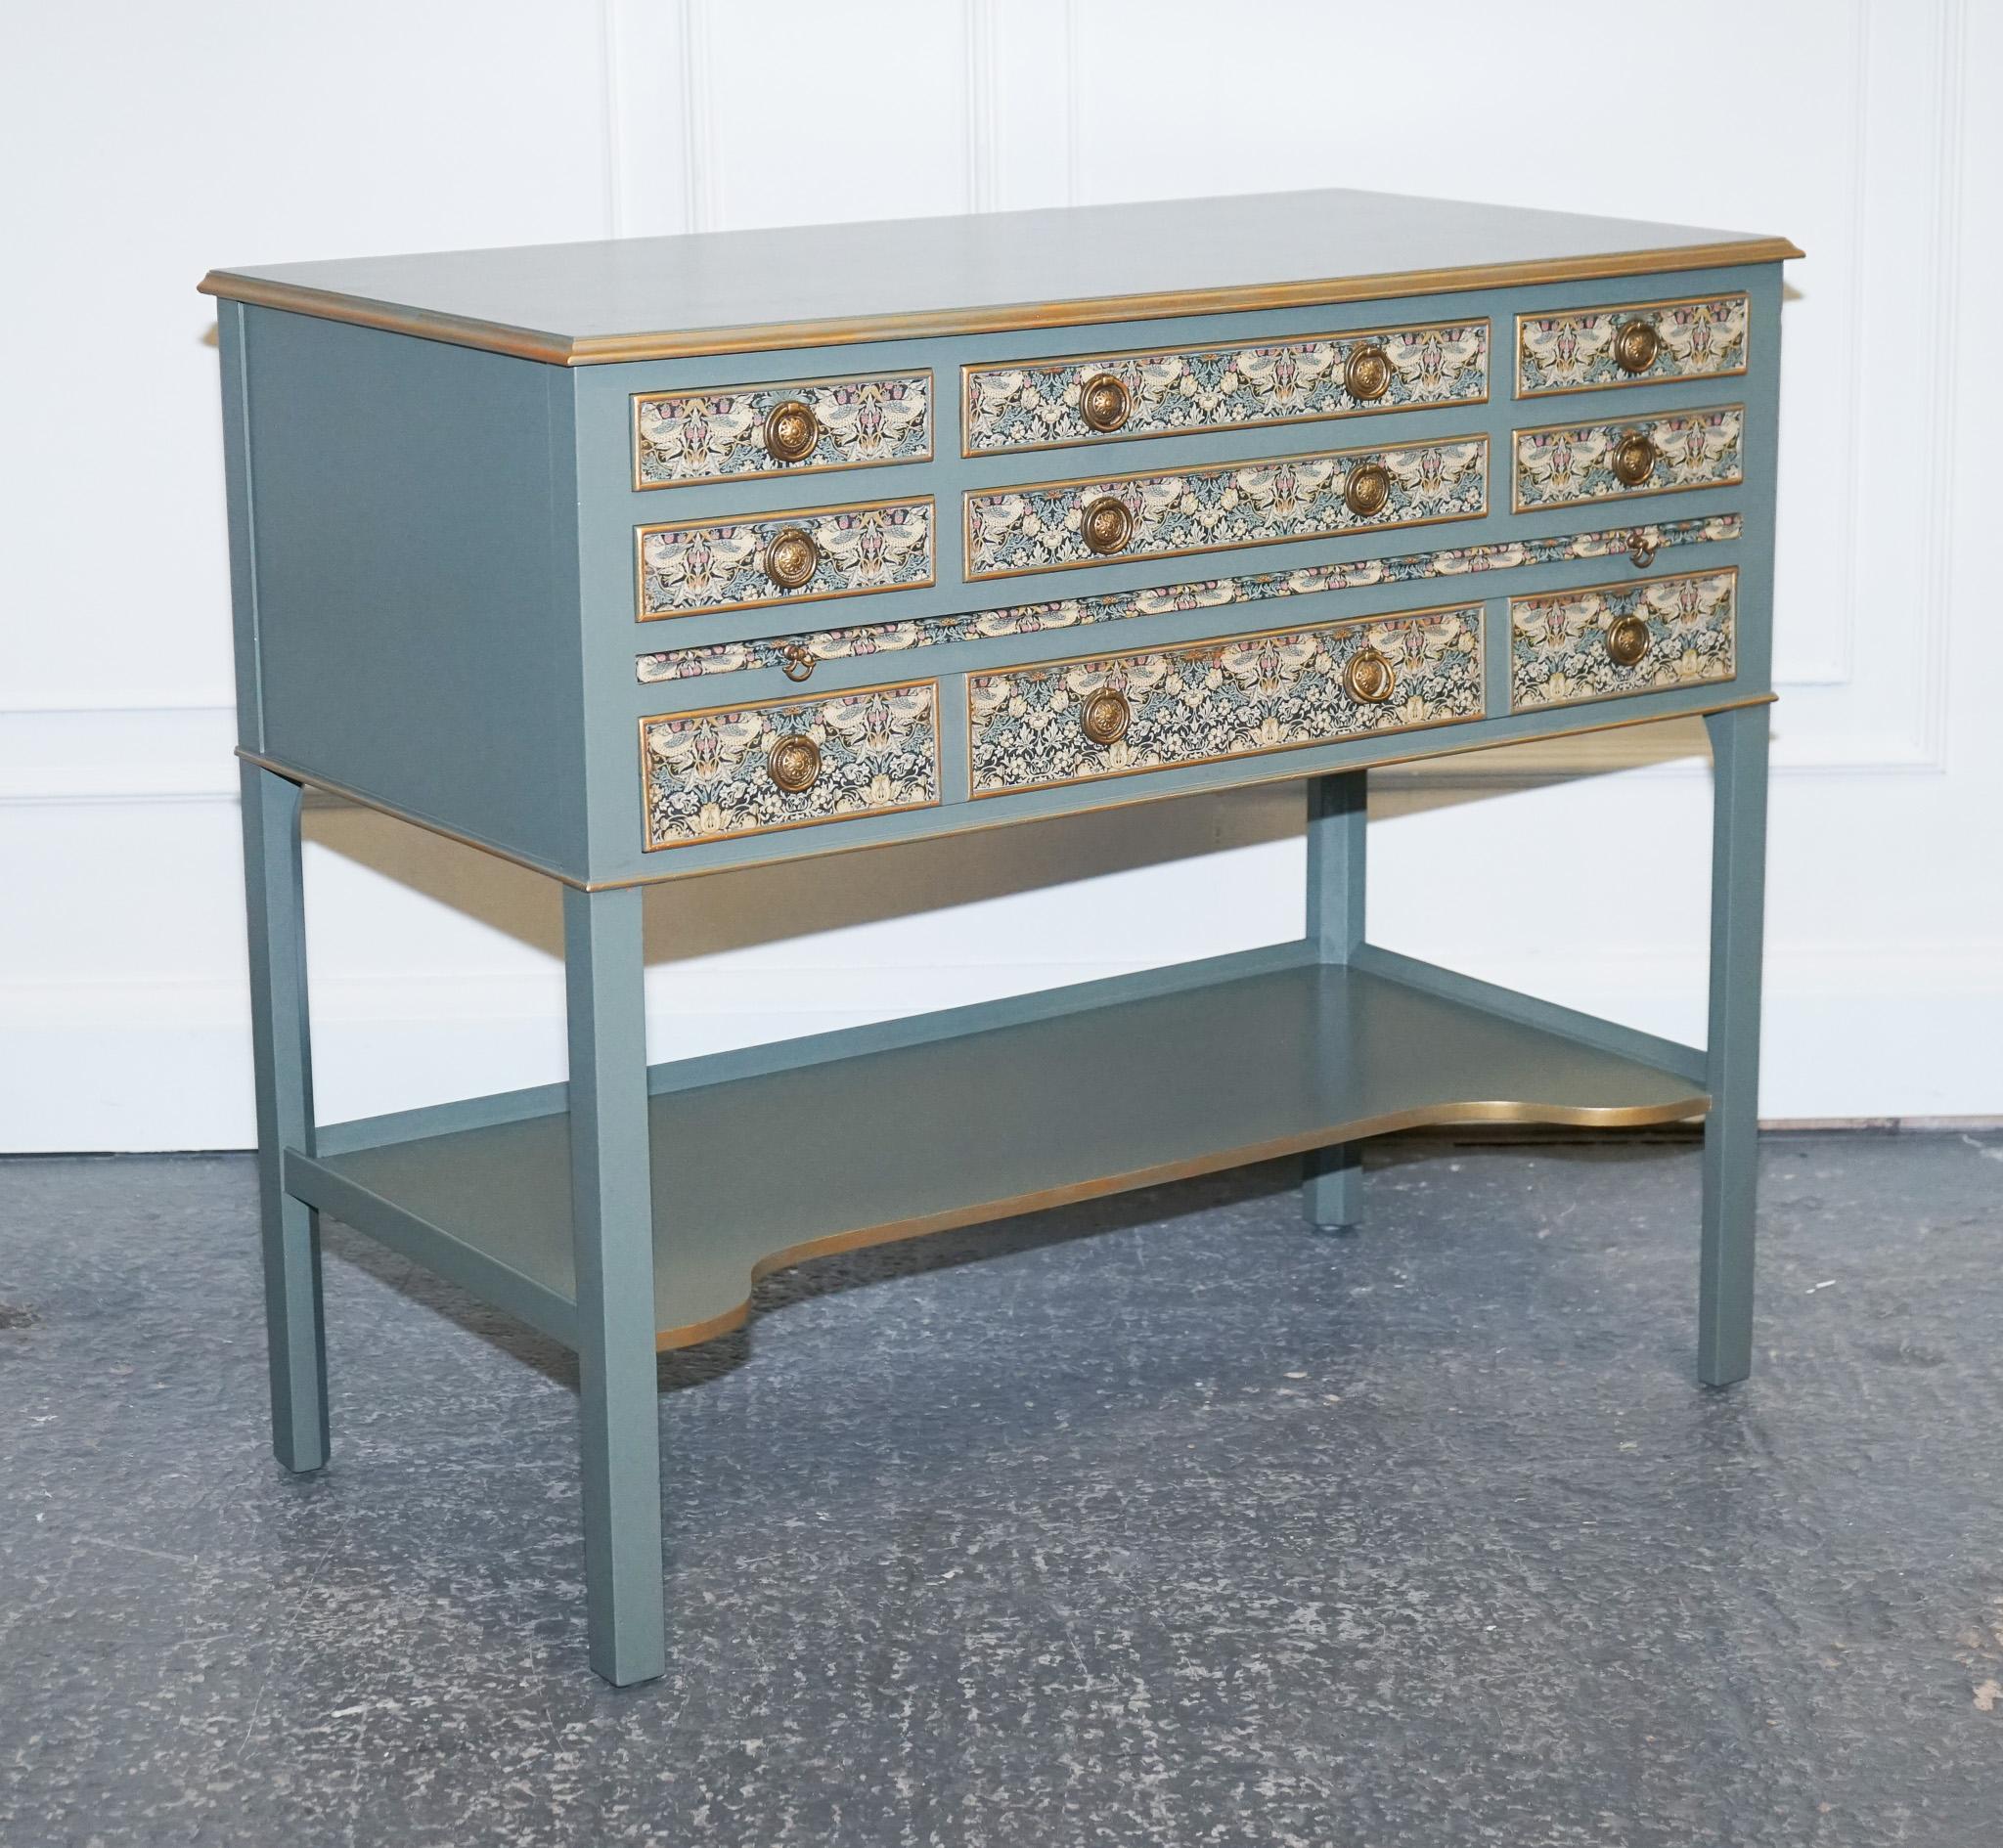 We are delighted to offer for sale this Gorgeous Eucalyptus Green & Gold Console Table With Strawberry Thief, William Morris Wallpaper.

This one-of-a-kind piece is sure to make a statement in your home, adding charm and sophistication to any room